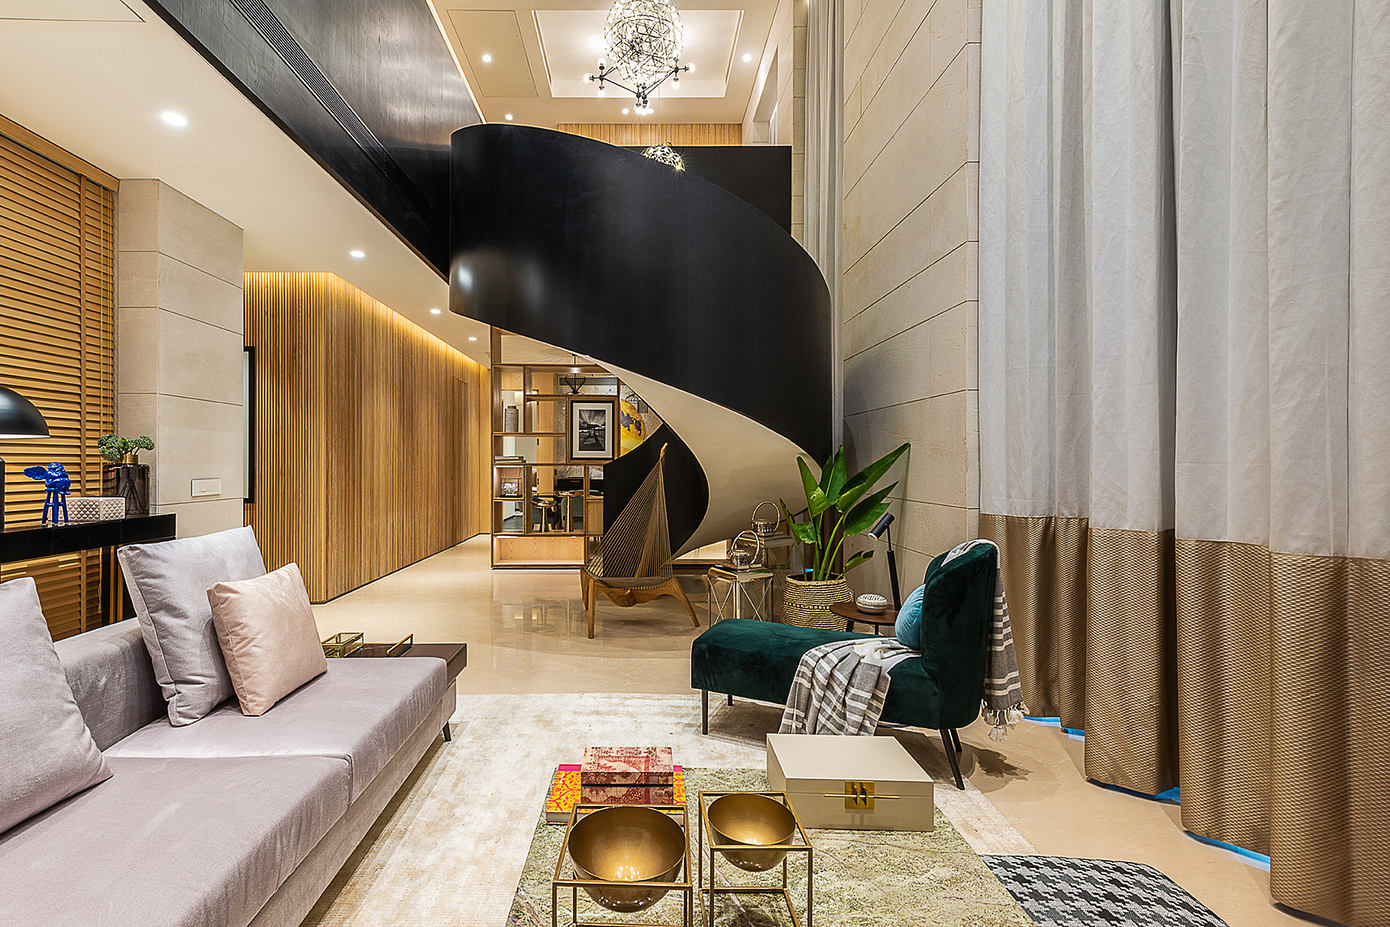 RL Penthouse: Spiral Staircase Steals the Spotlight